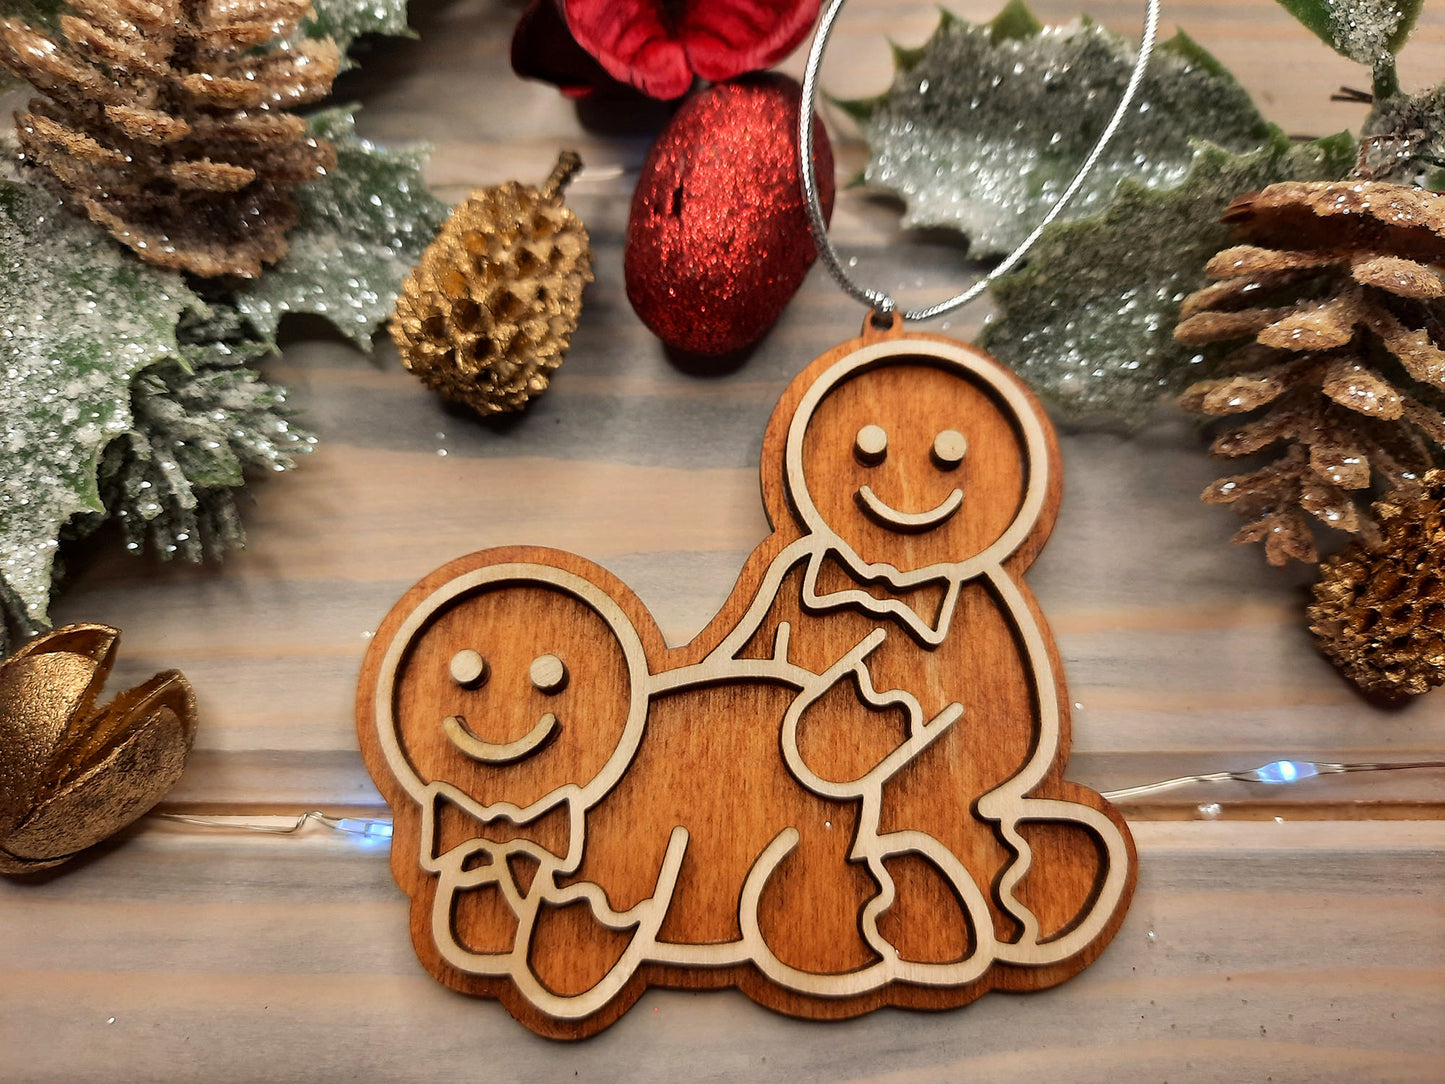 Pack of 10 Same Sex Gingerbreads  - Christmas Decoration verG - PG Factory